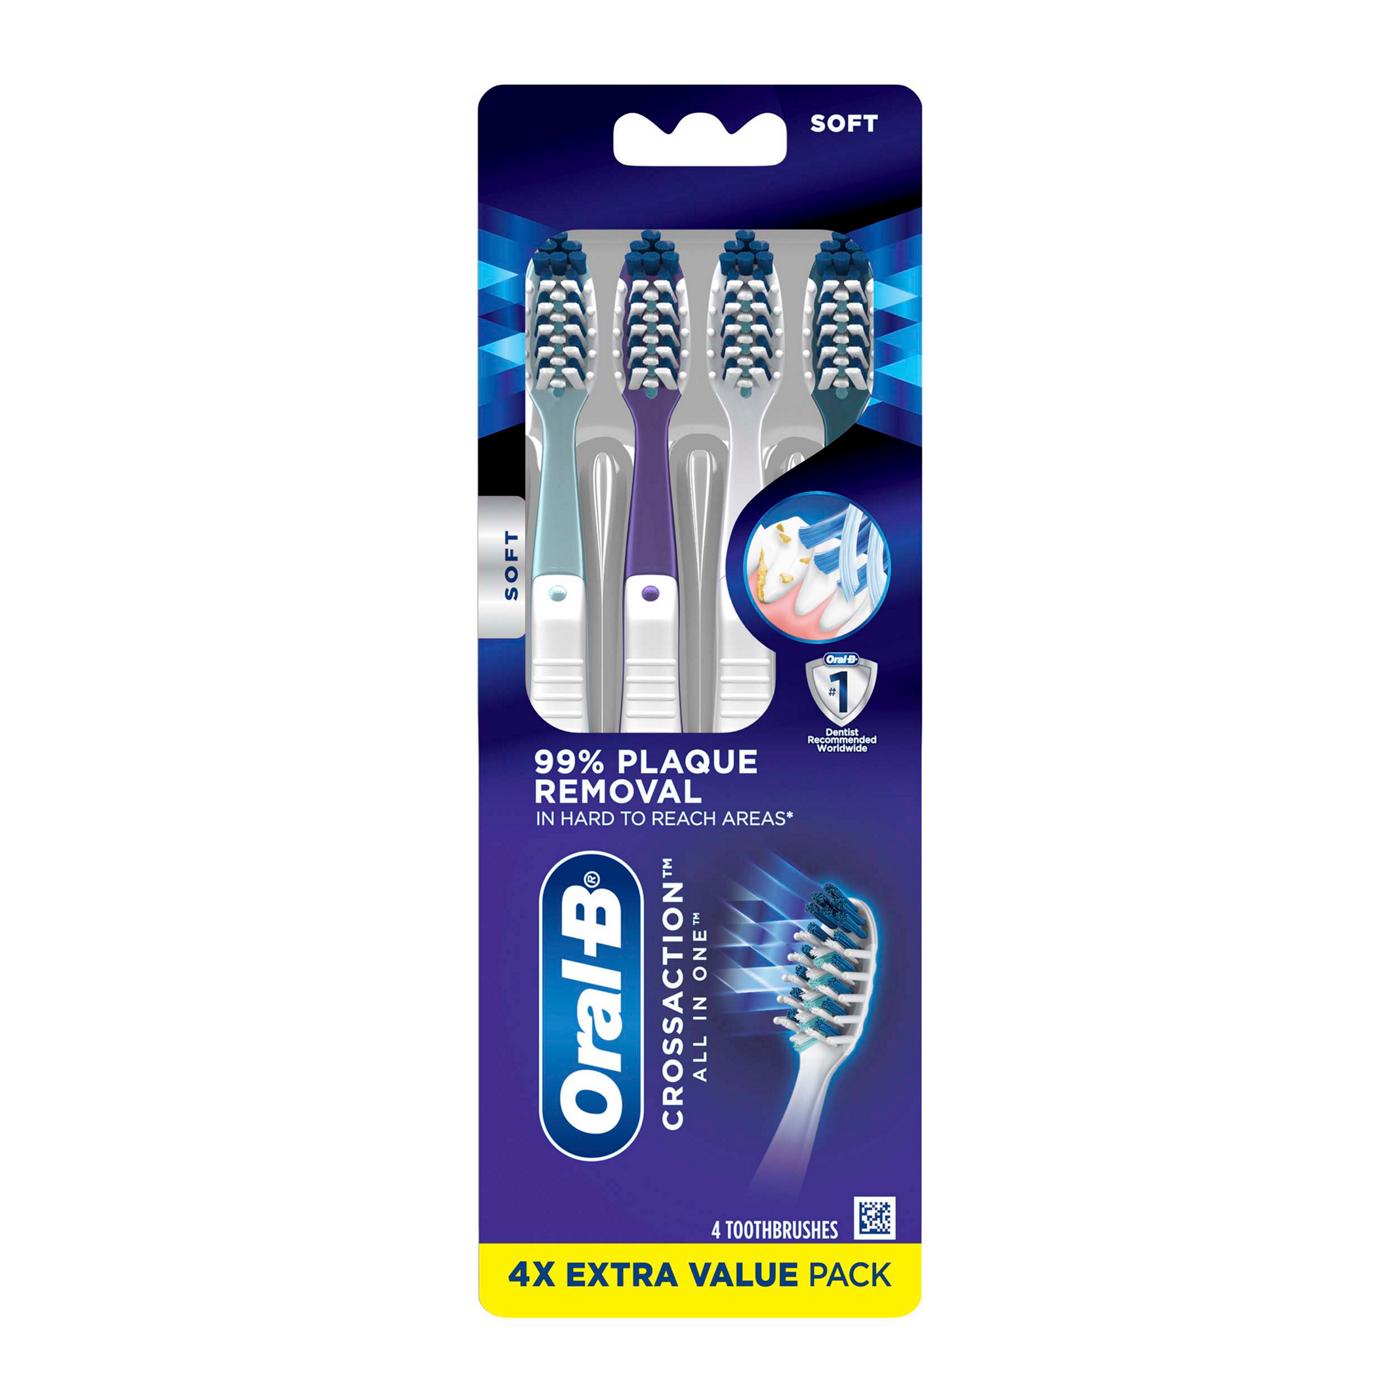 Oral-B Cross Action All In One Toothbrush Value Pack - Soft; image 1 of 10